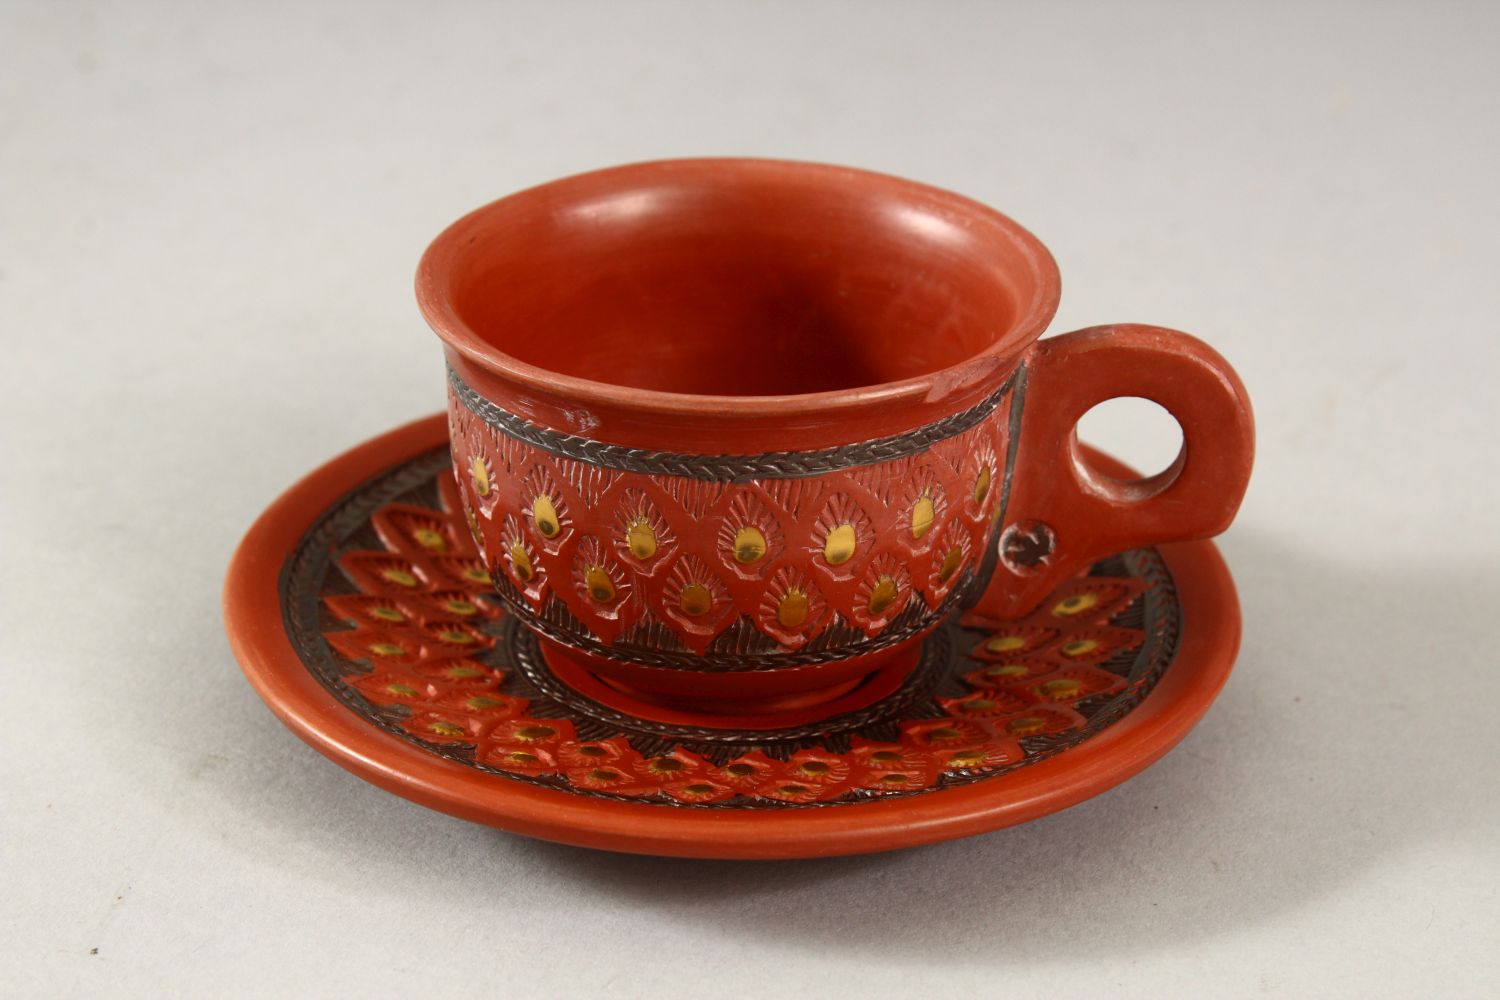 A MIXED LOT OF TURKISH TOPHANE POTTERY - comprising 2 x cup & saucers plus 3 x pipes. - Image 6 of 6